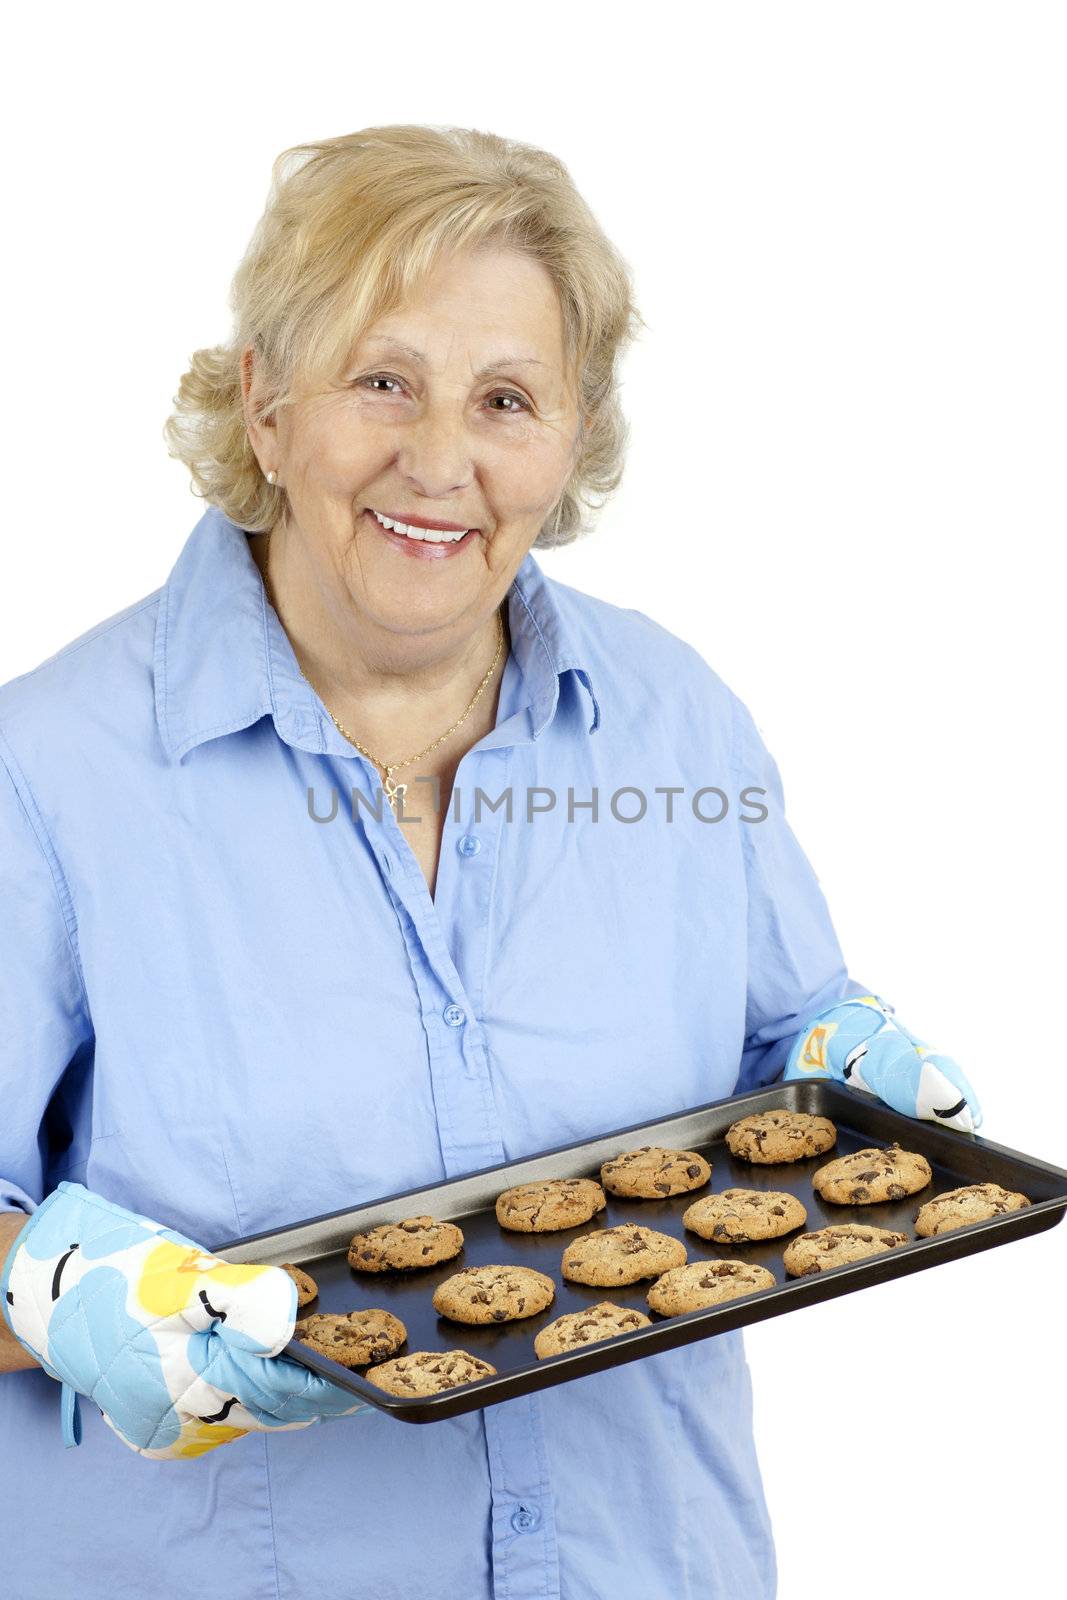 Mother and grand-mother welcoming her family with a smile and freshly baked home made chocolate cookies.